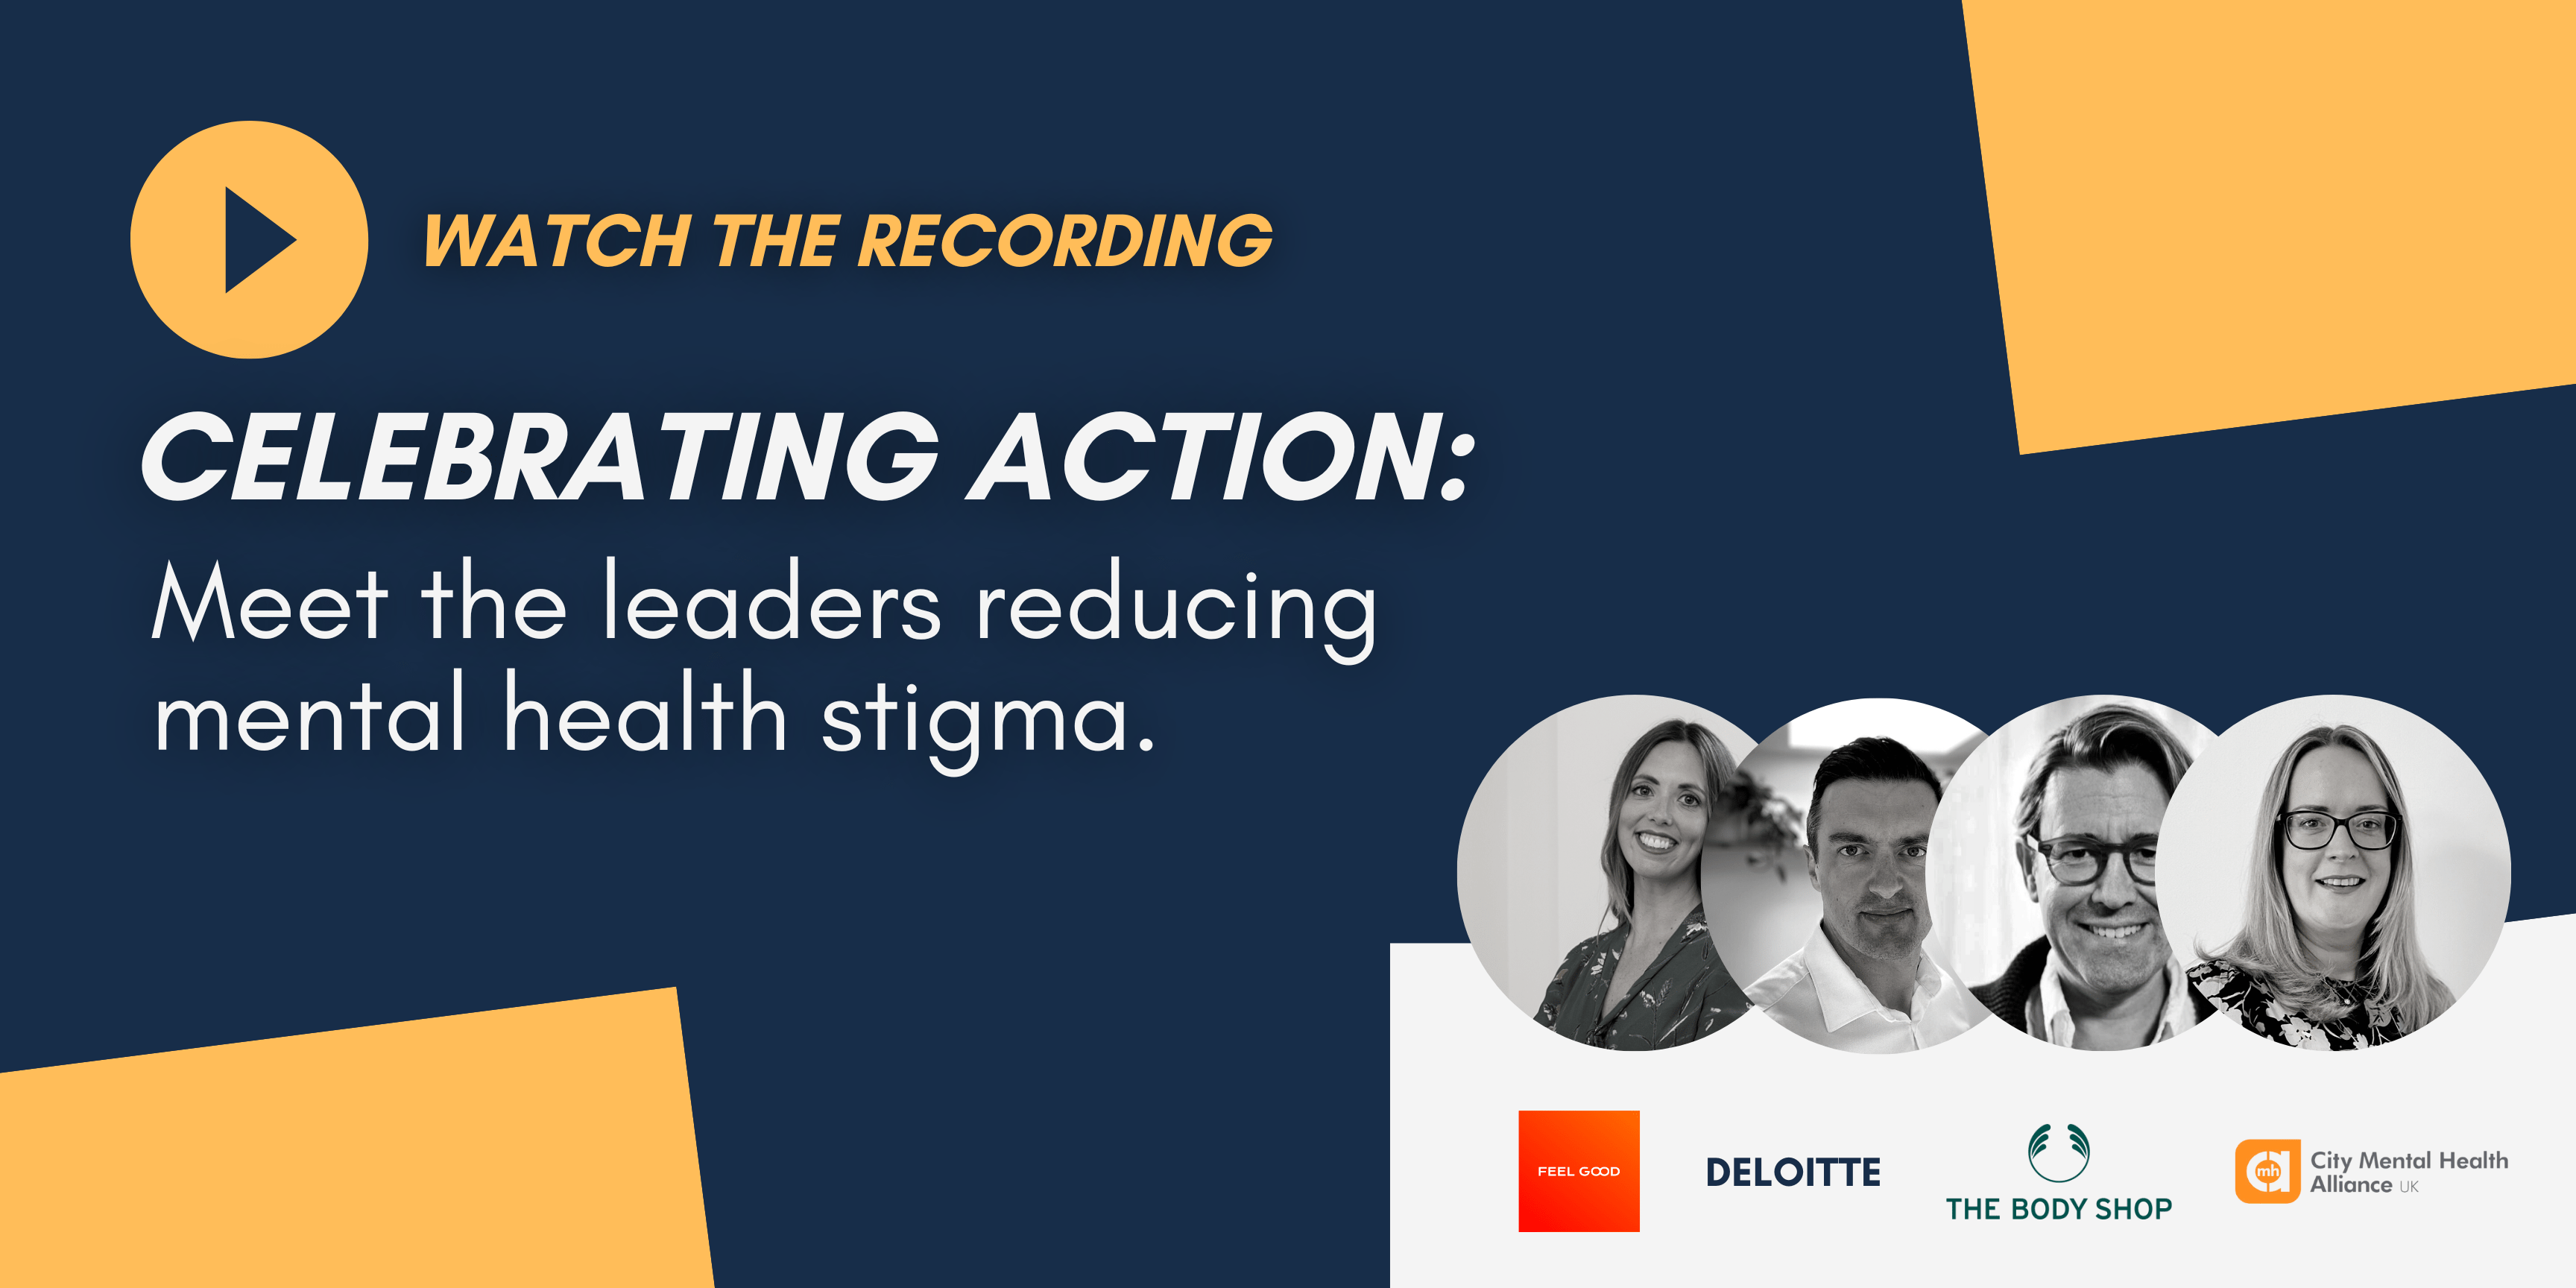 Watch the recording of Celebrating Action: Meet the leaders reducing mental health stigma